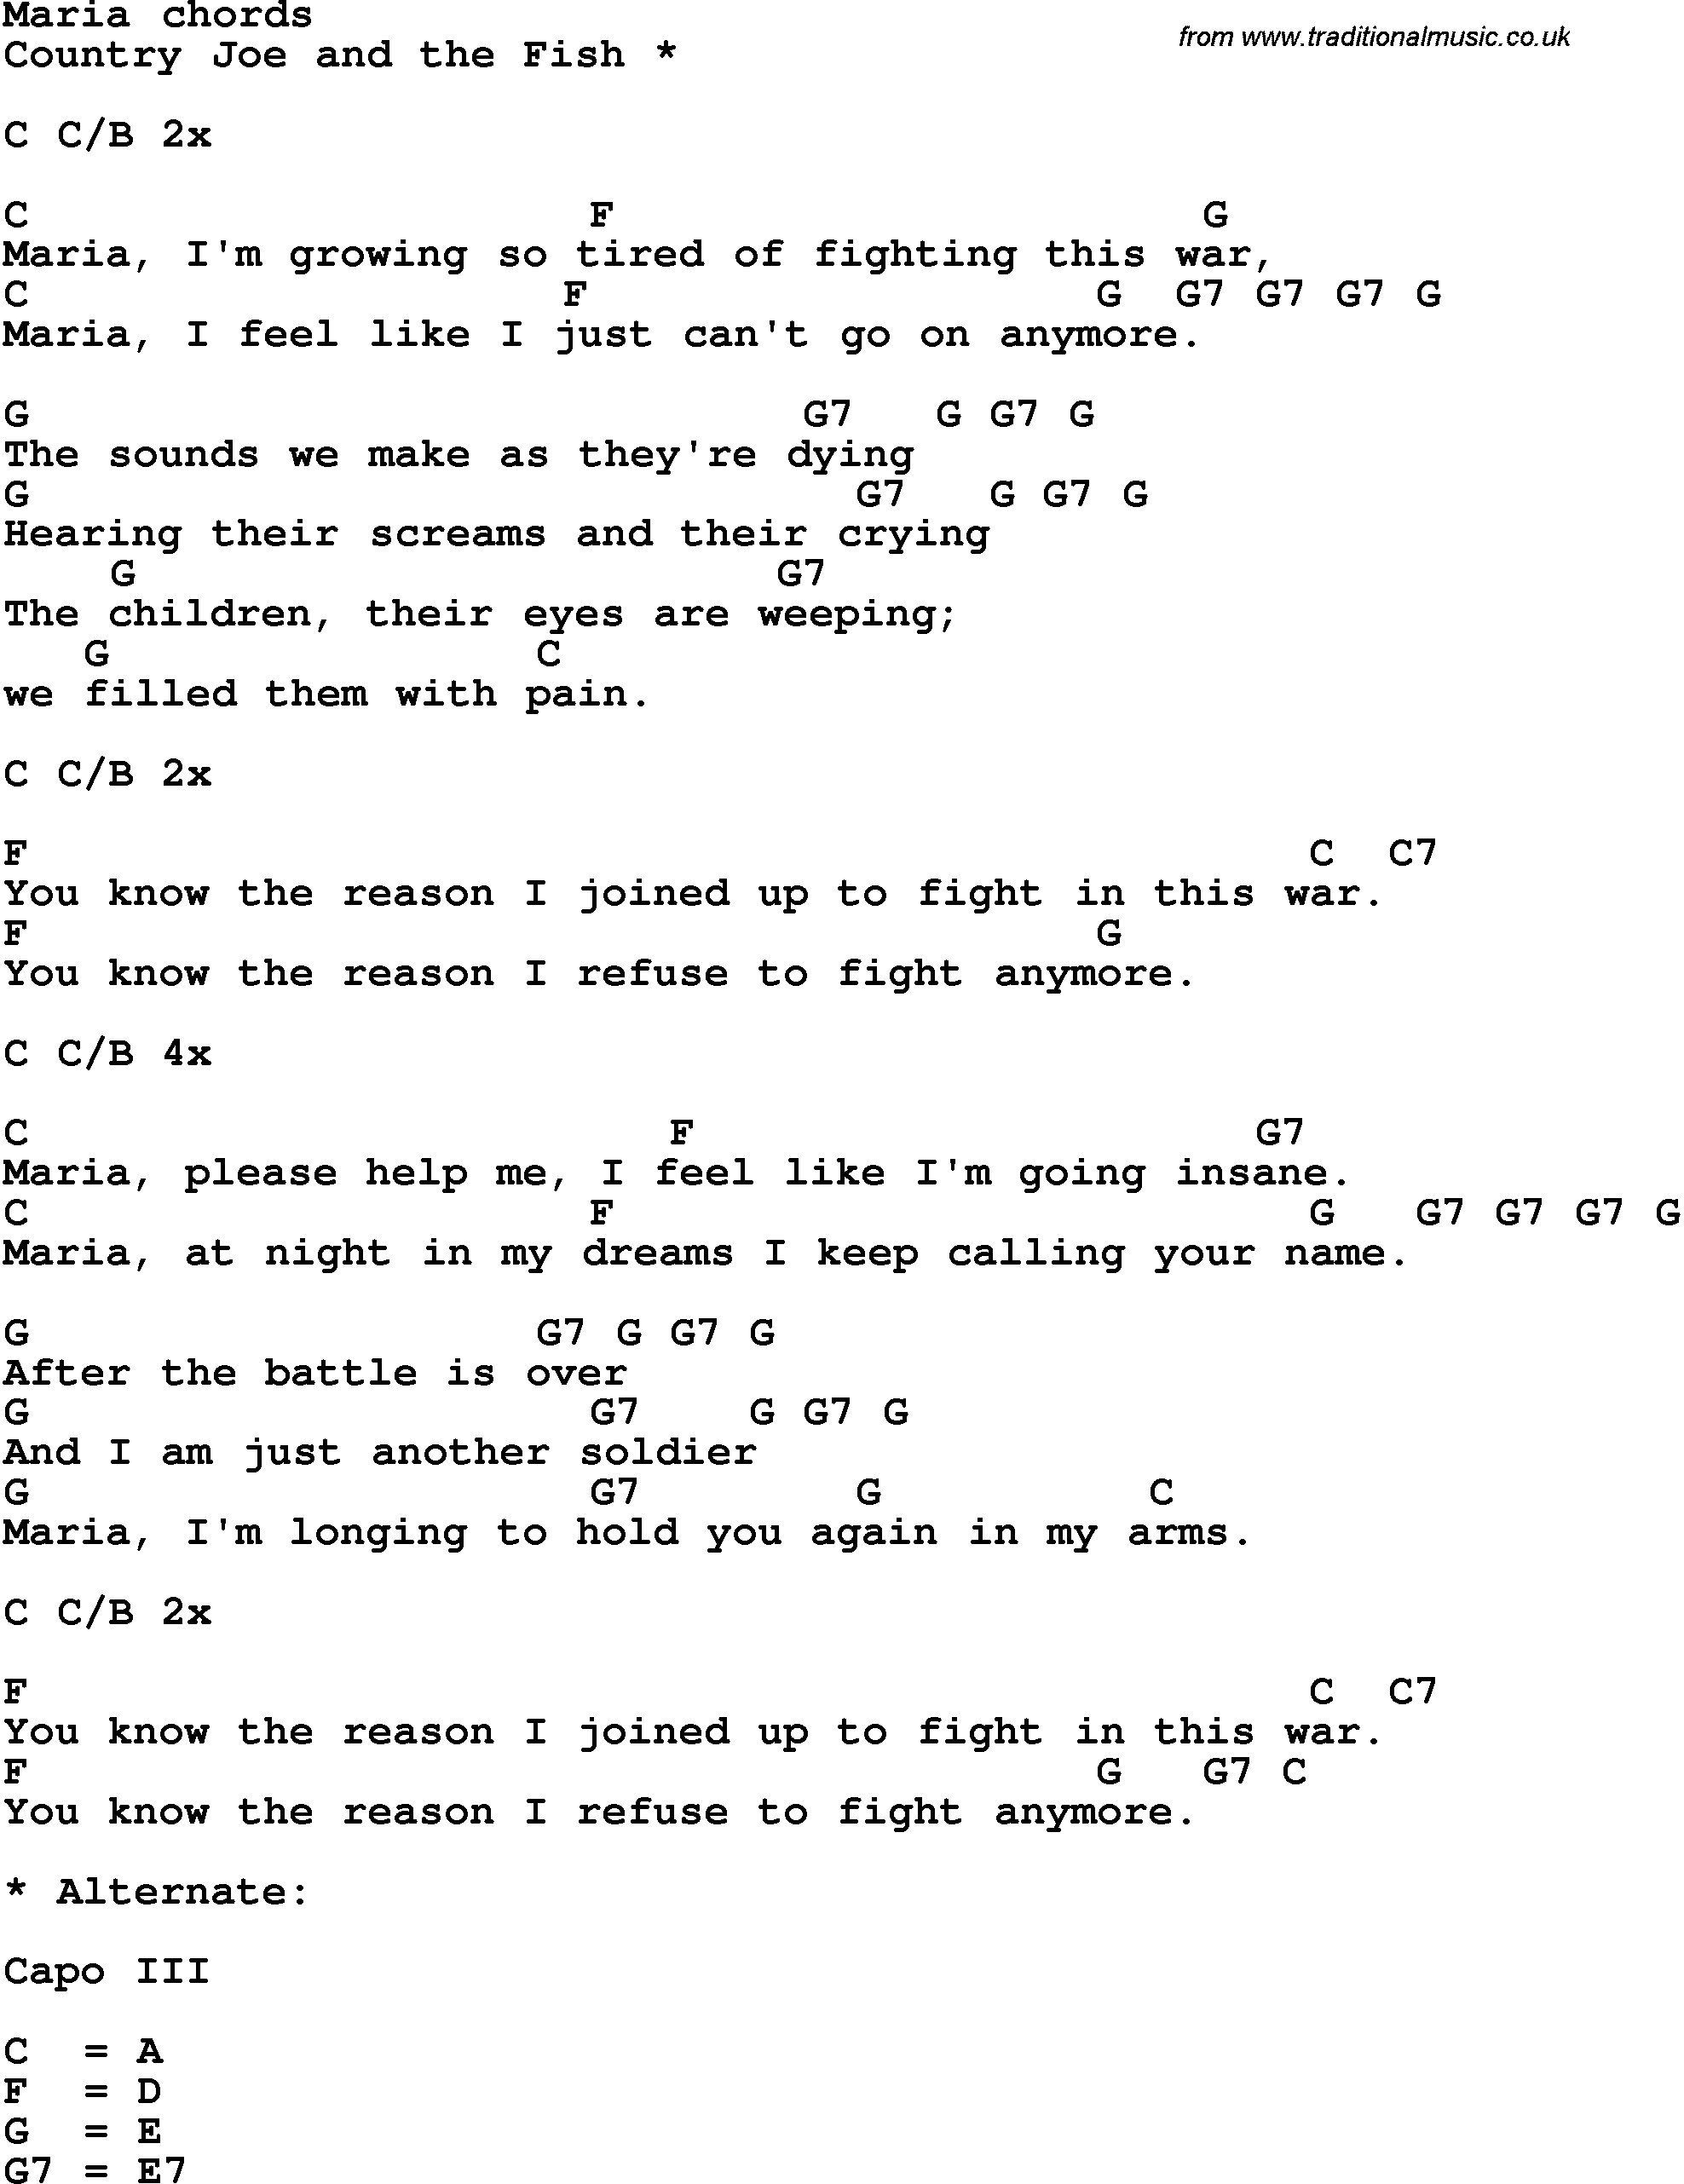 Song Lyrics with guitar chords for Maria